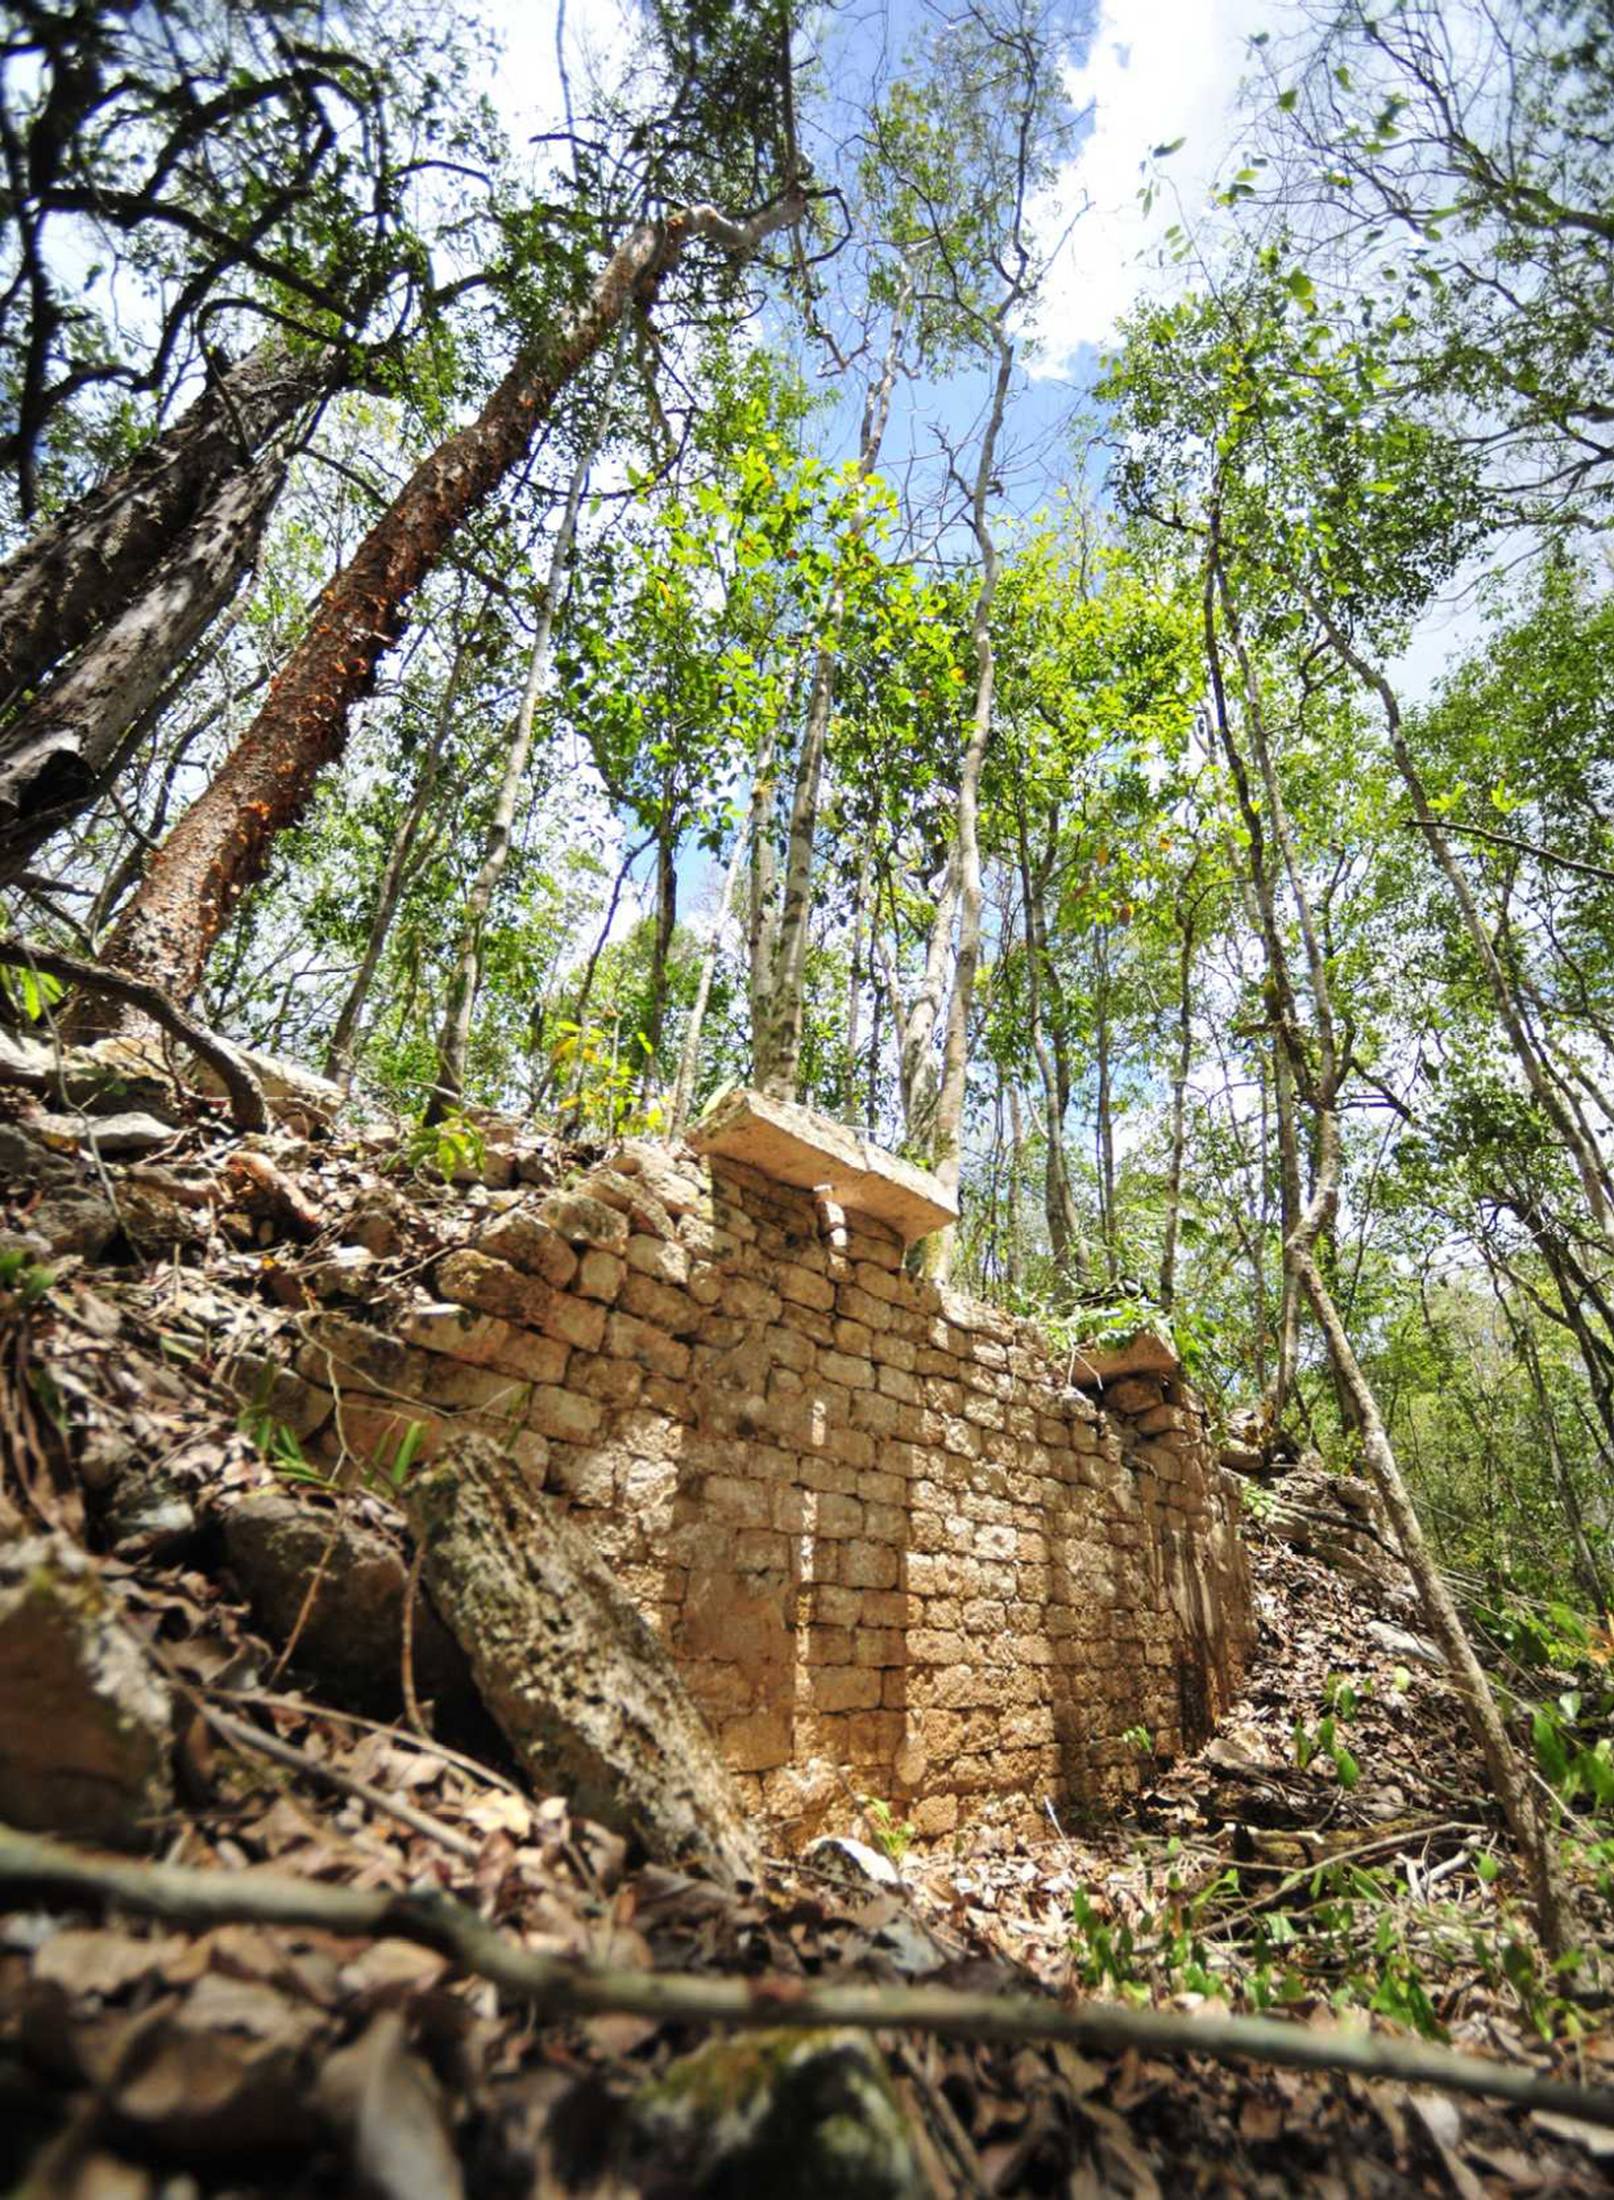 INAH handout photo shows the remains of a building at the newly discovered ancient Maya city Chactun in Yucatan peninsula